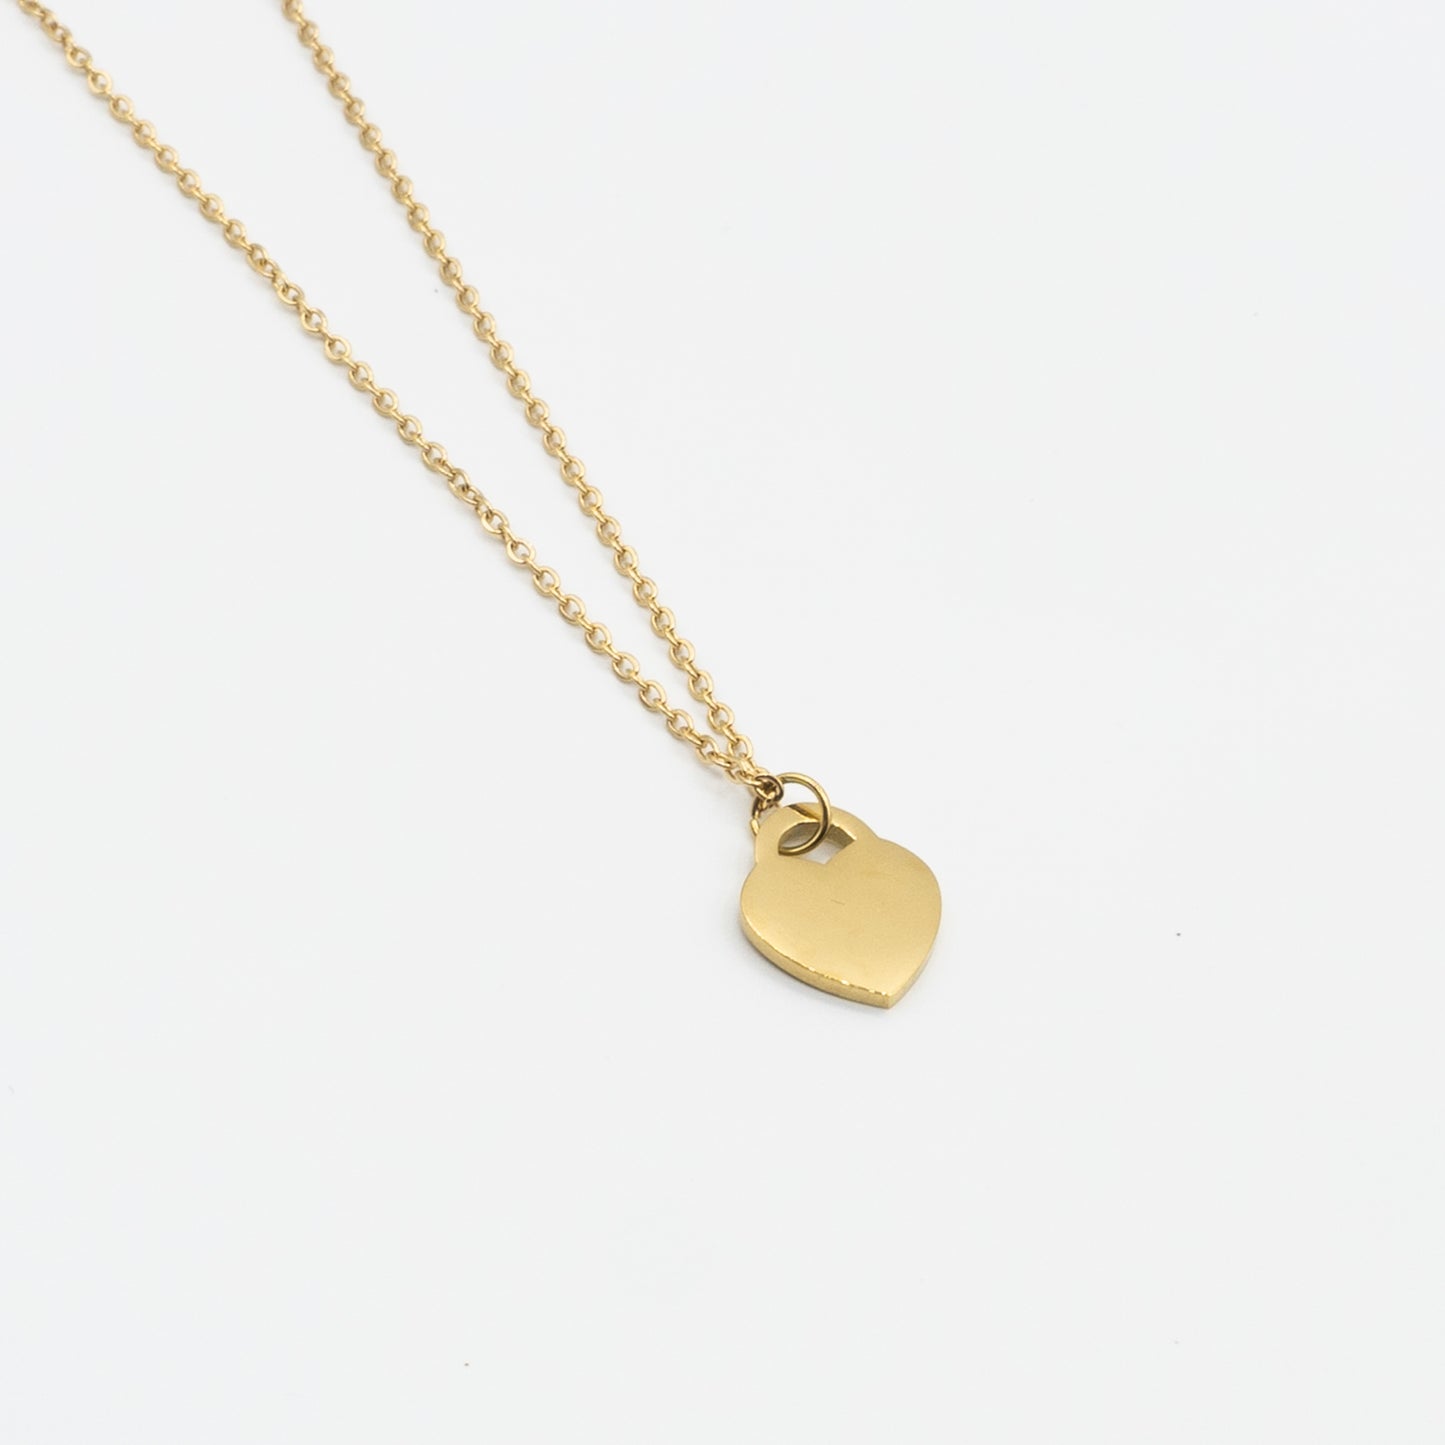 SAM - stainless steel heart necklace